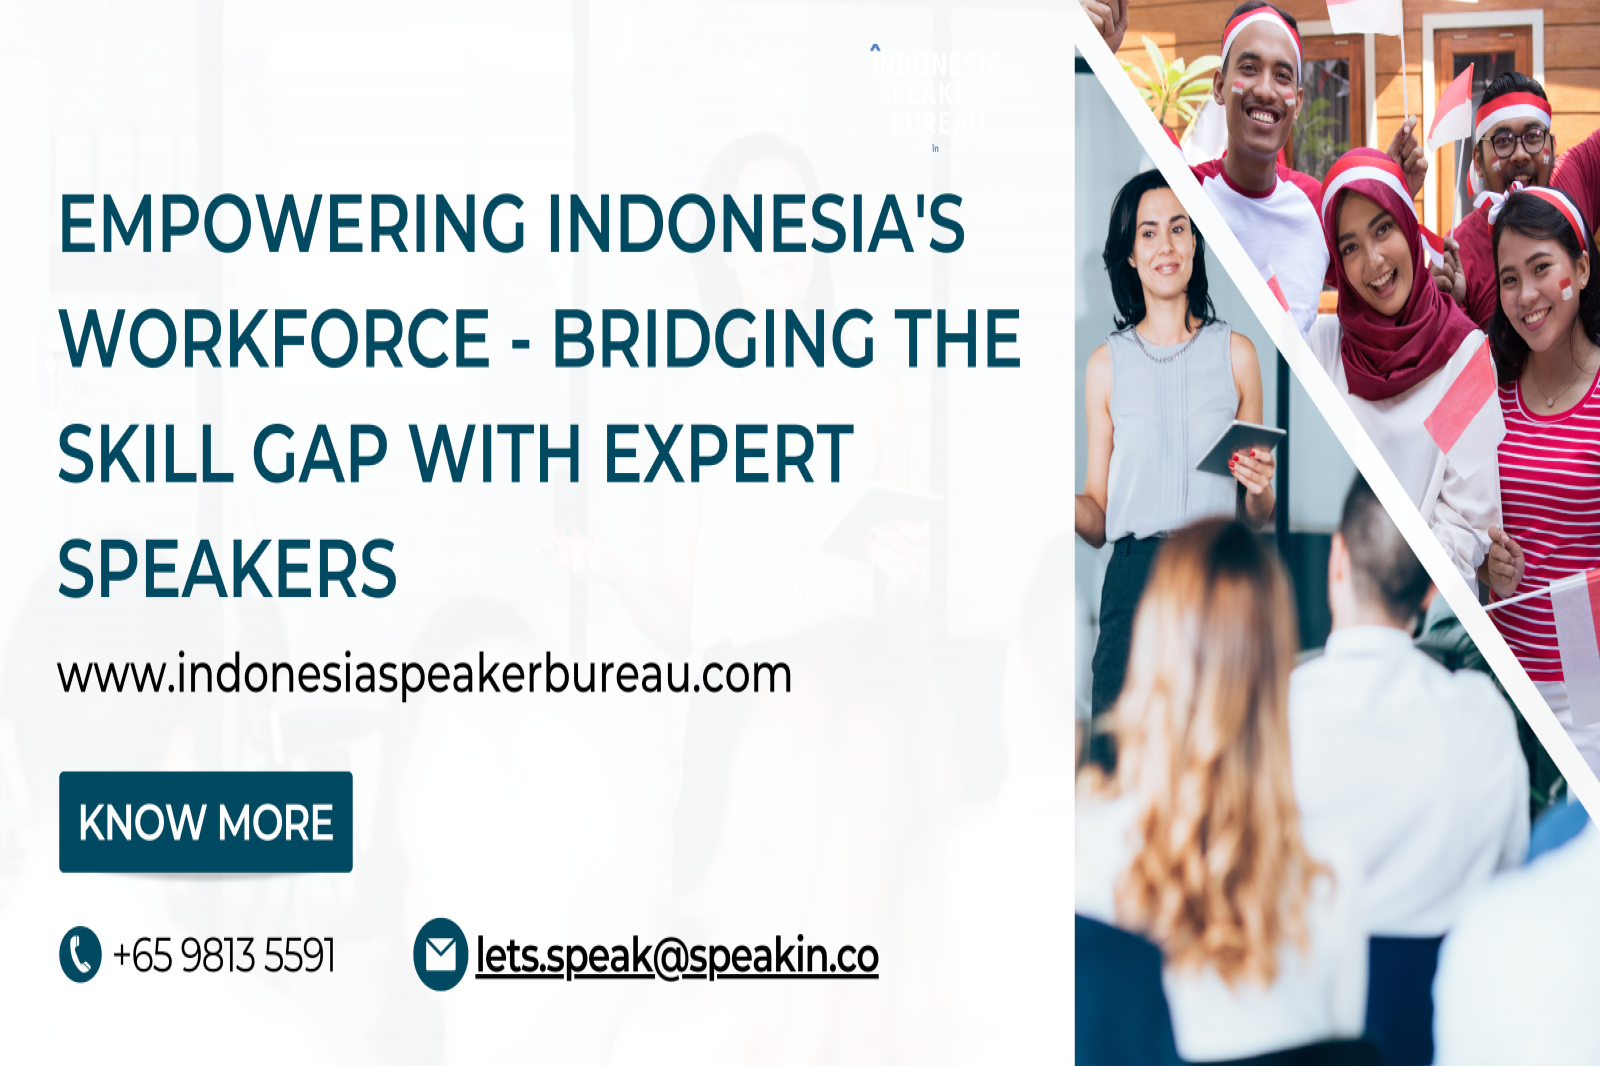 Empowering Indonesia's Workforce - Bridging the Skill Gap with Expert Speakers